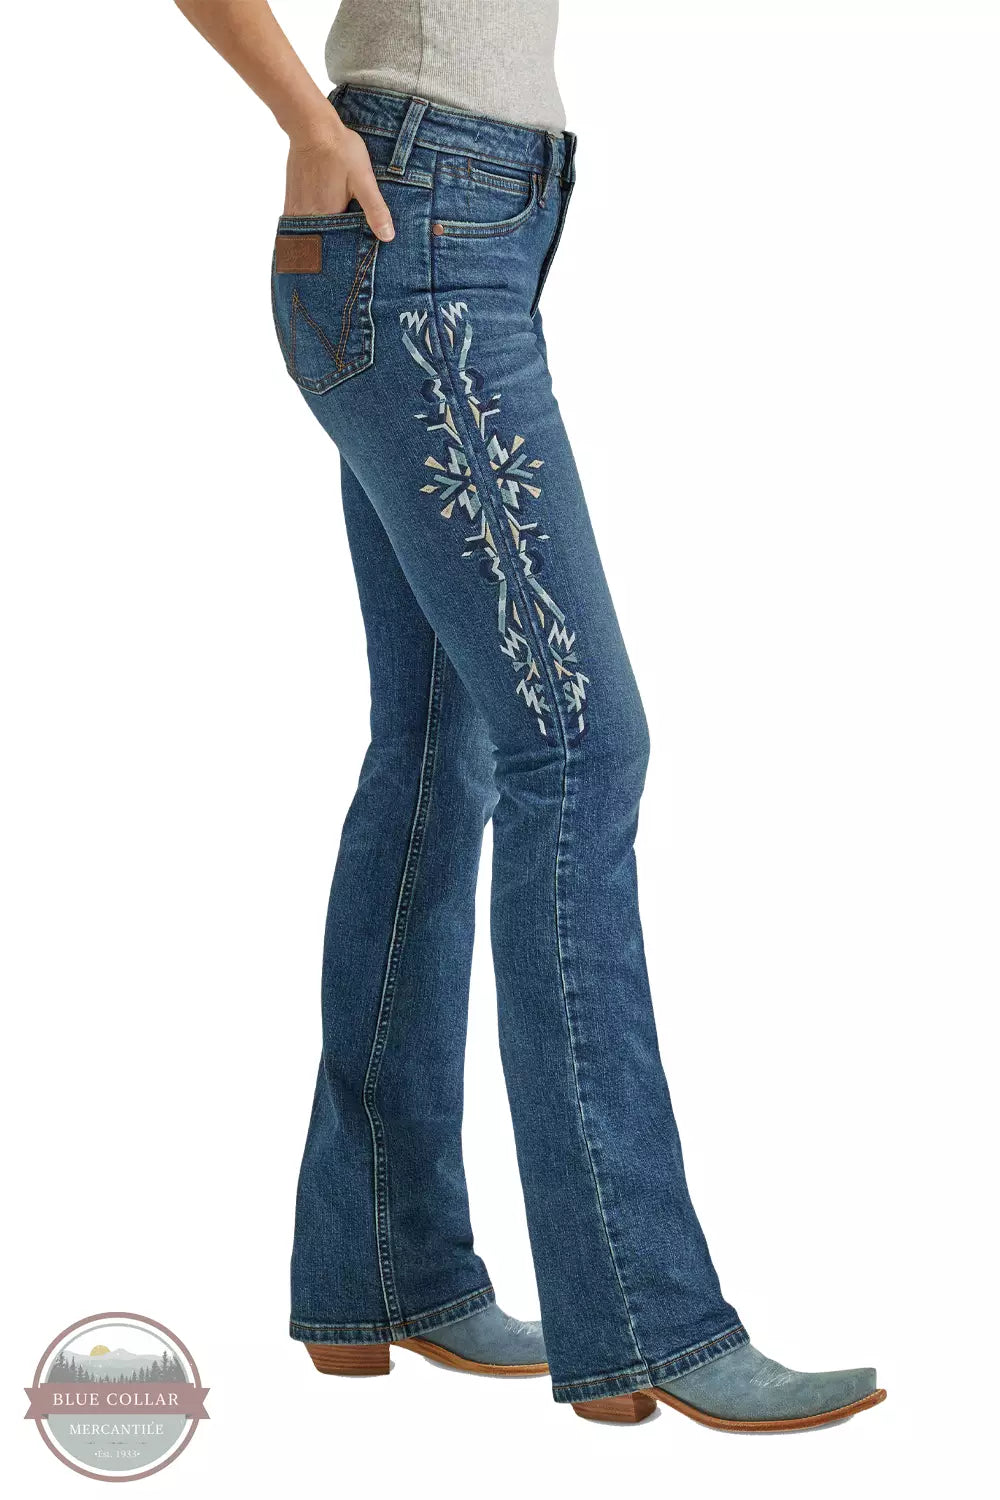 Wrangler 112338917 Retro Embroidered High Rise Slim Boot Jeans in Bethany